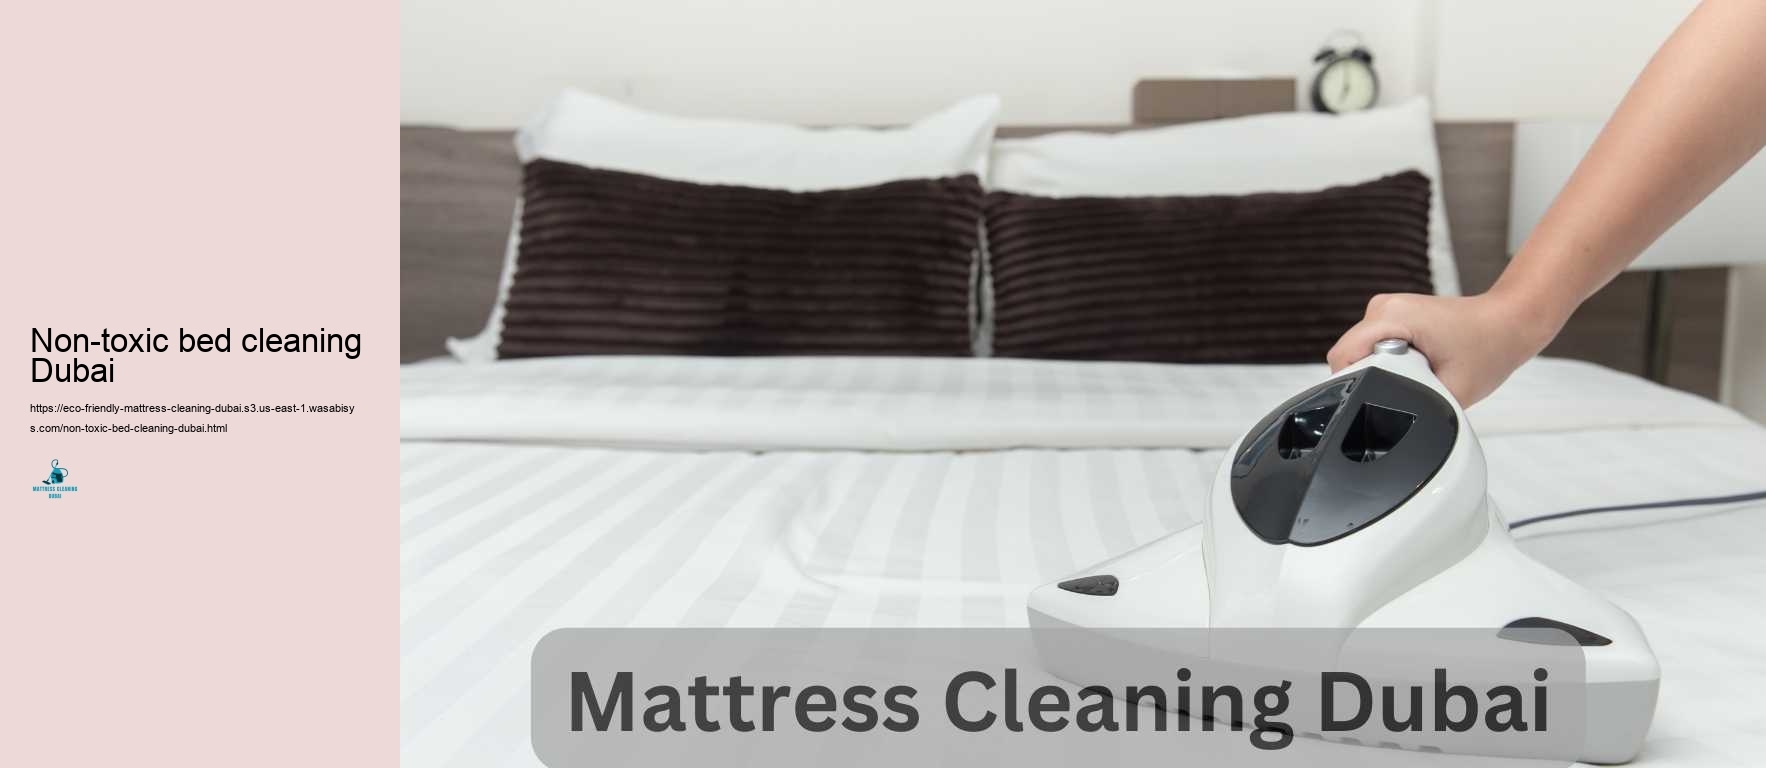 Non-toxic bed cleaning Dubai